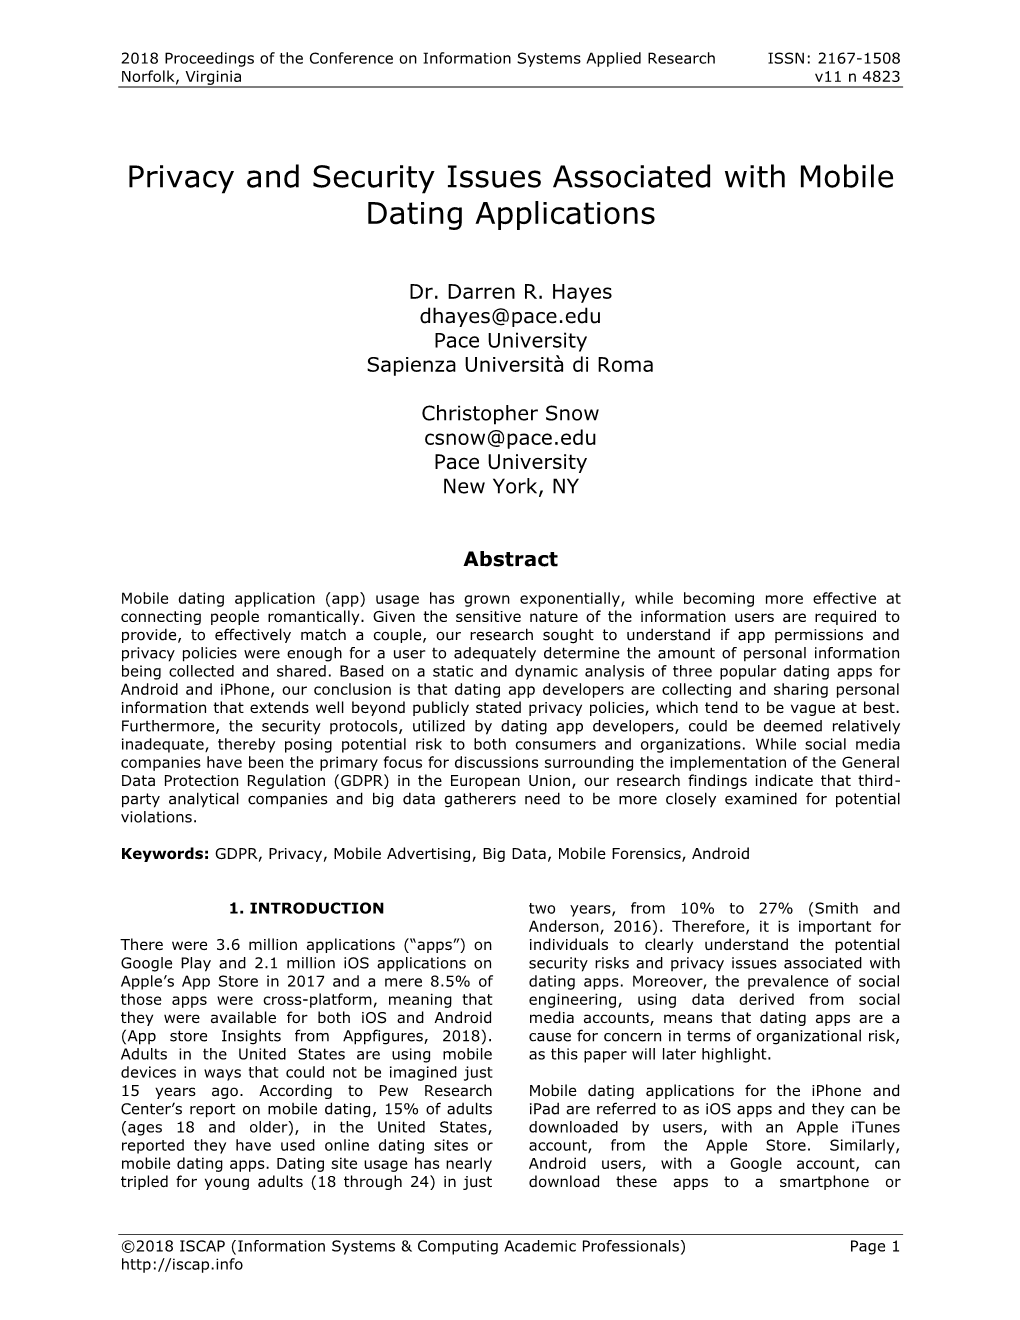 Privacy and Security Issues Associated with Mobile Dating Applications